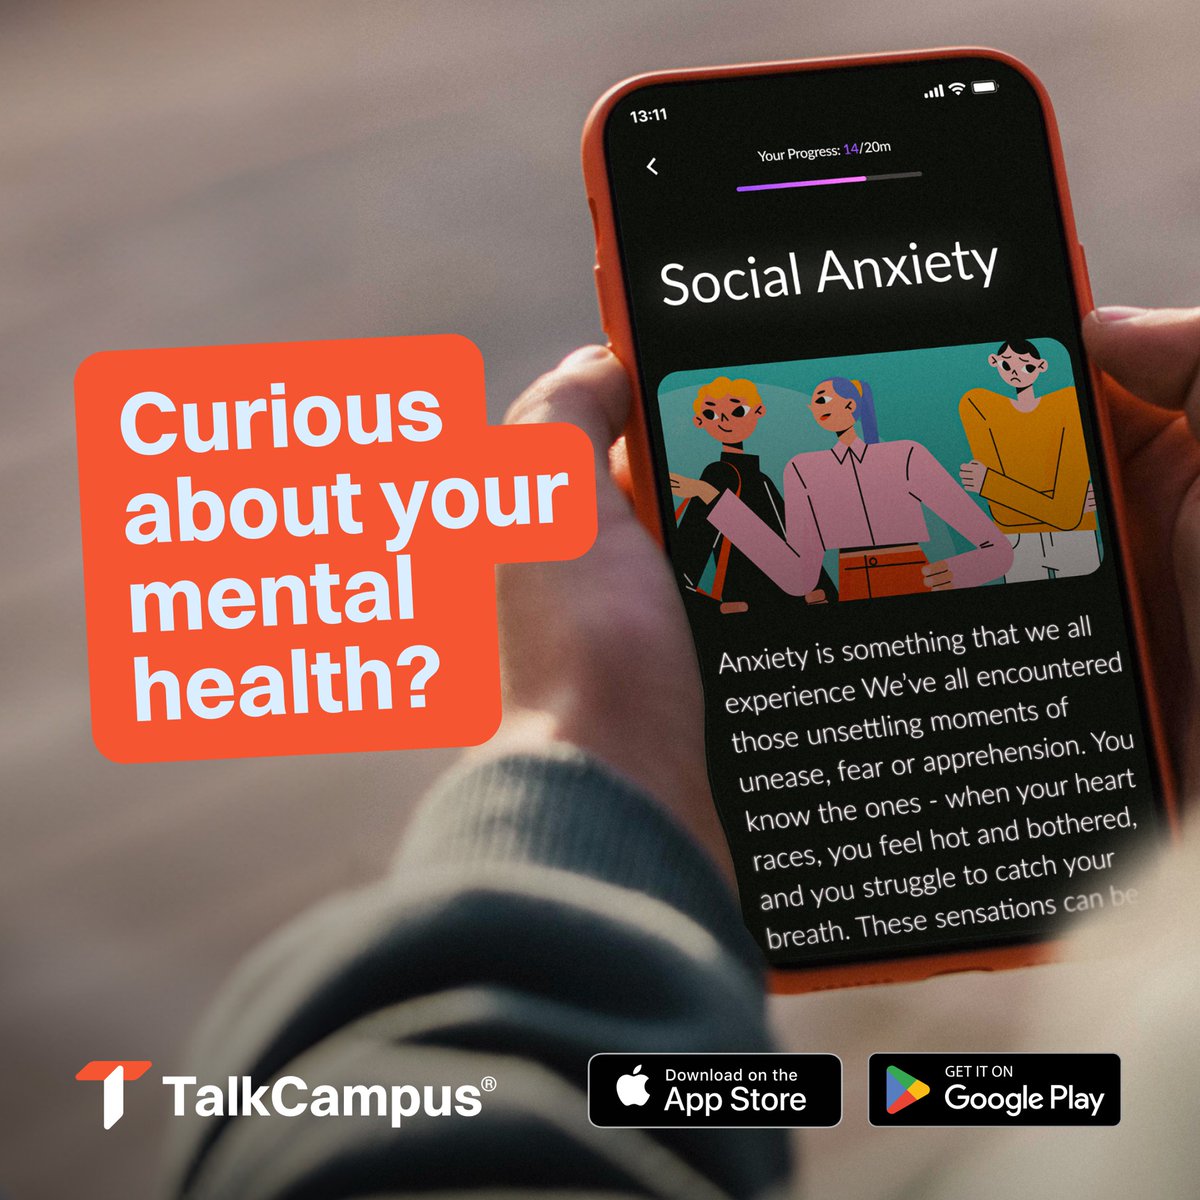 Need a chat? Student life can be a lot sometimes. Download the TalkCampus app to connect anonymously with other students who understand what you're going through. Sign up for free with your student email address at talkcampus.io/sign-up